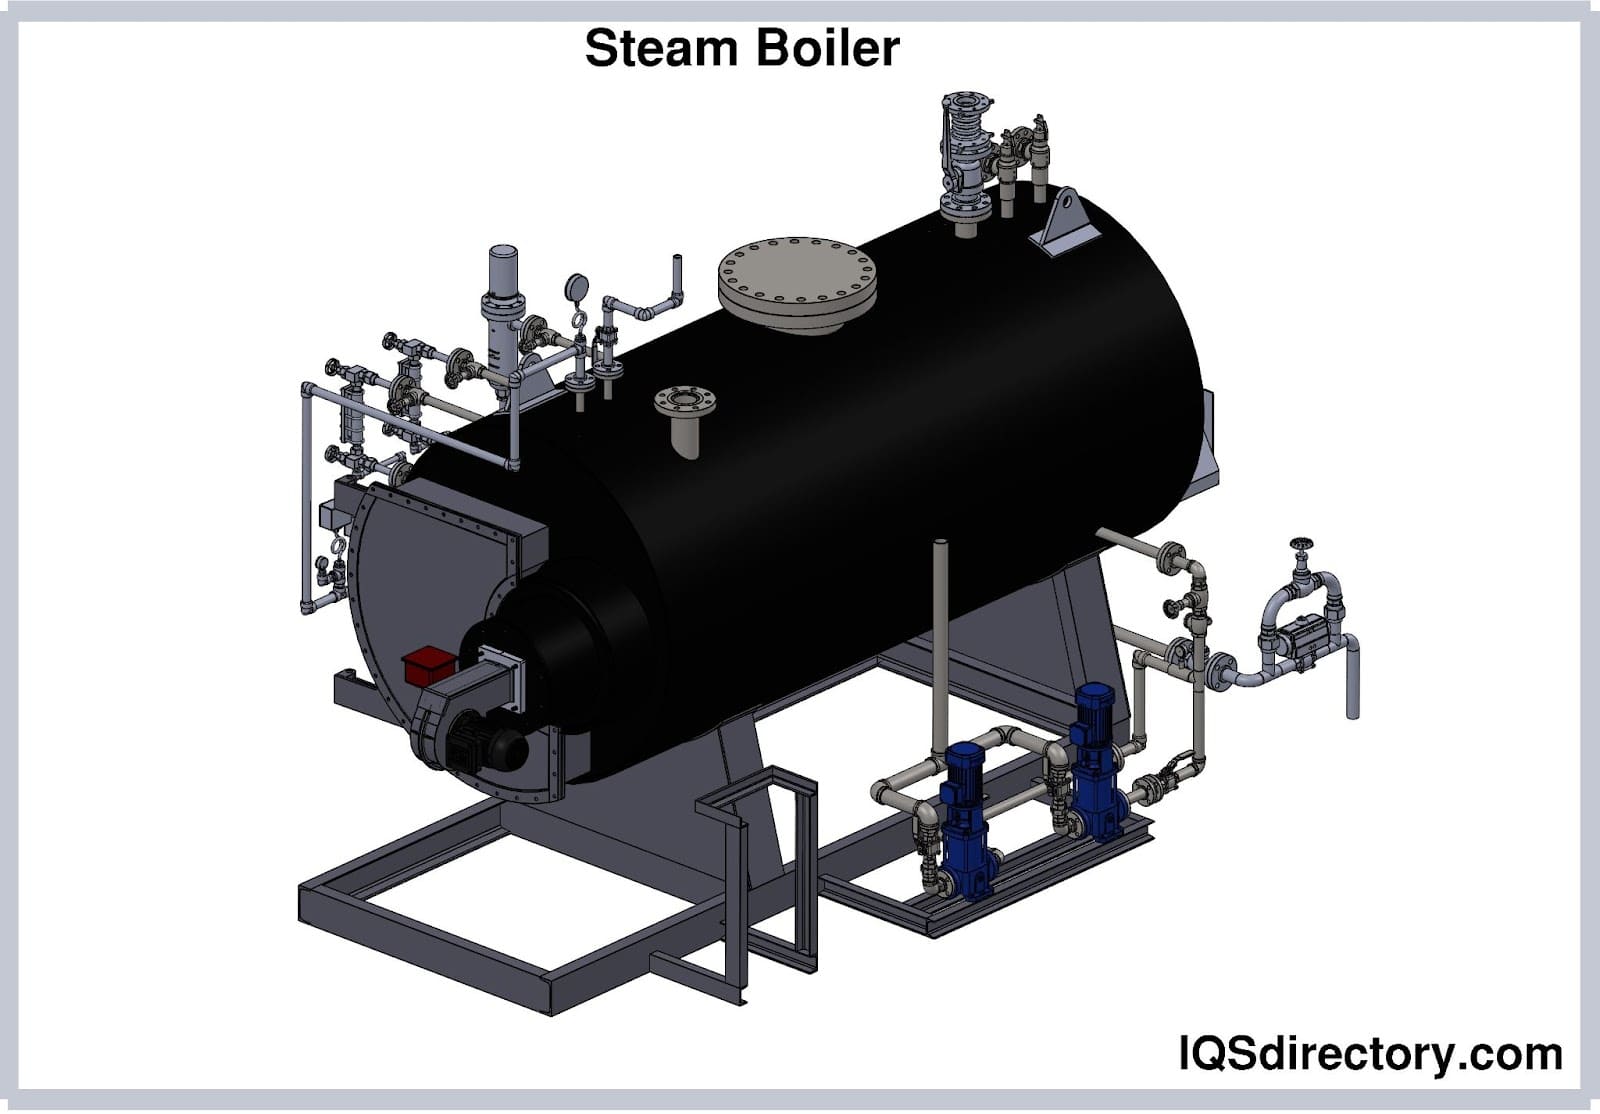 How to Troubleshoot a Hot Water/Steam Distribution System: Tips